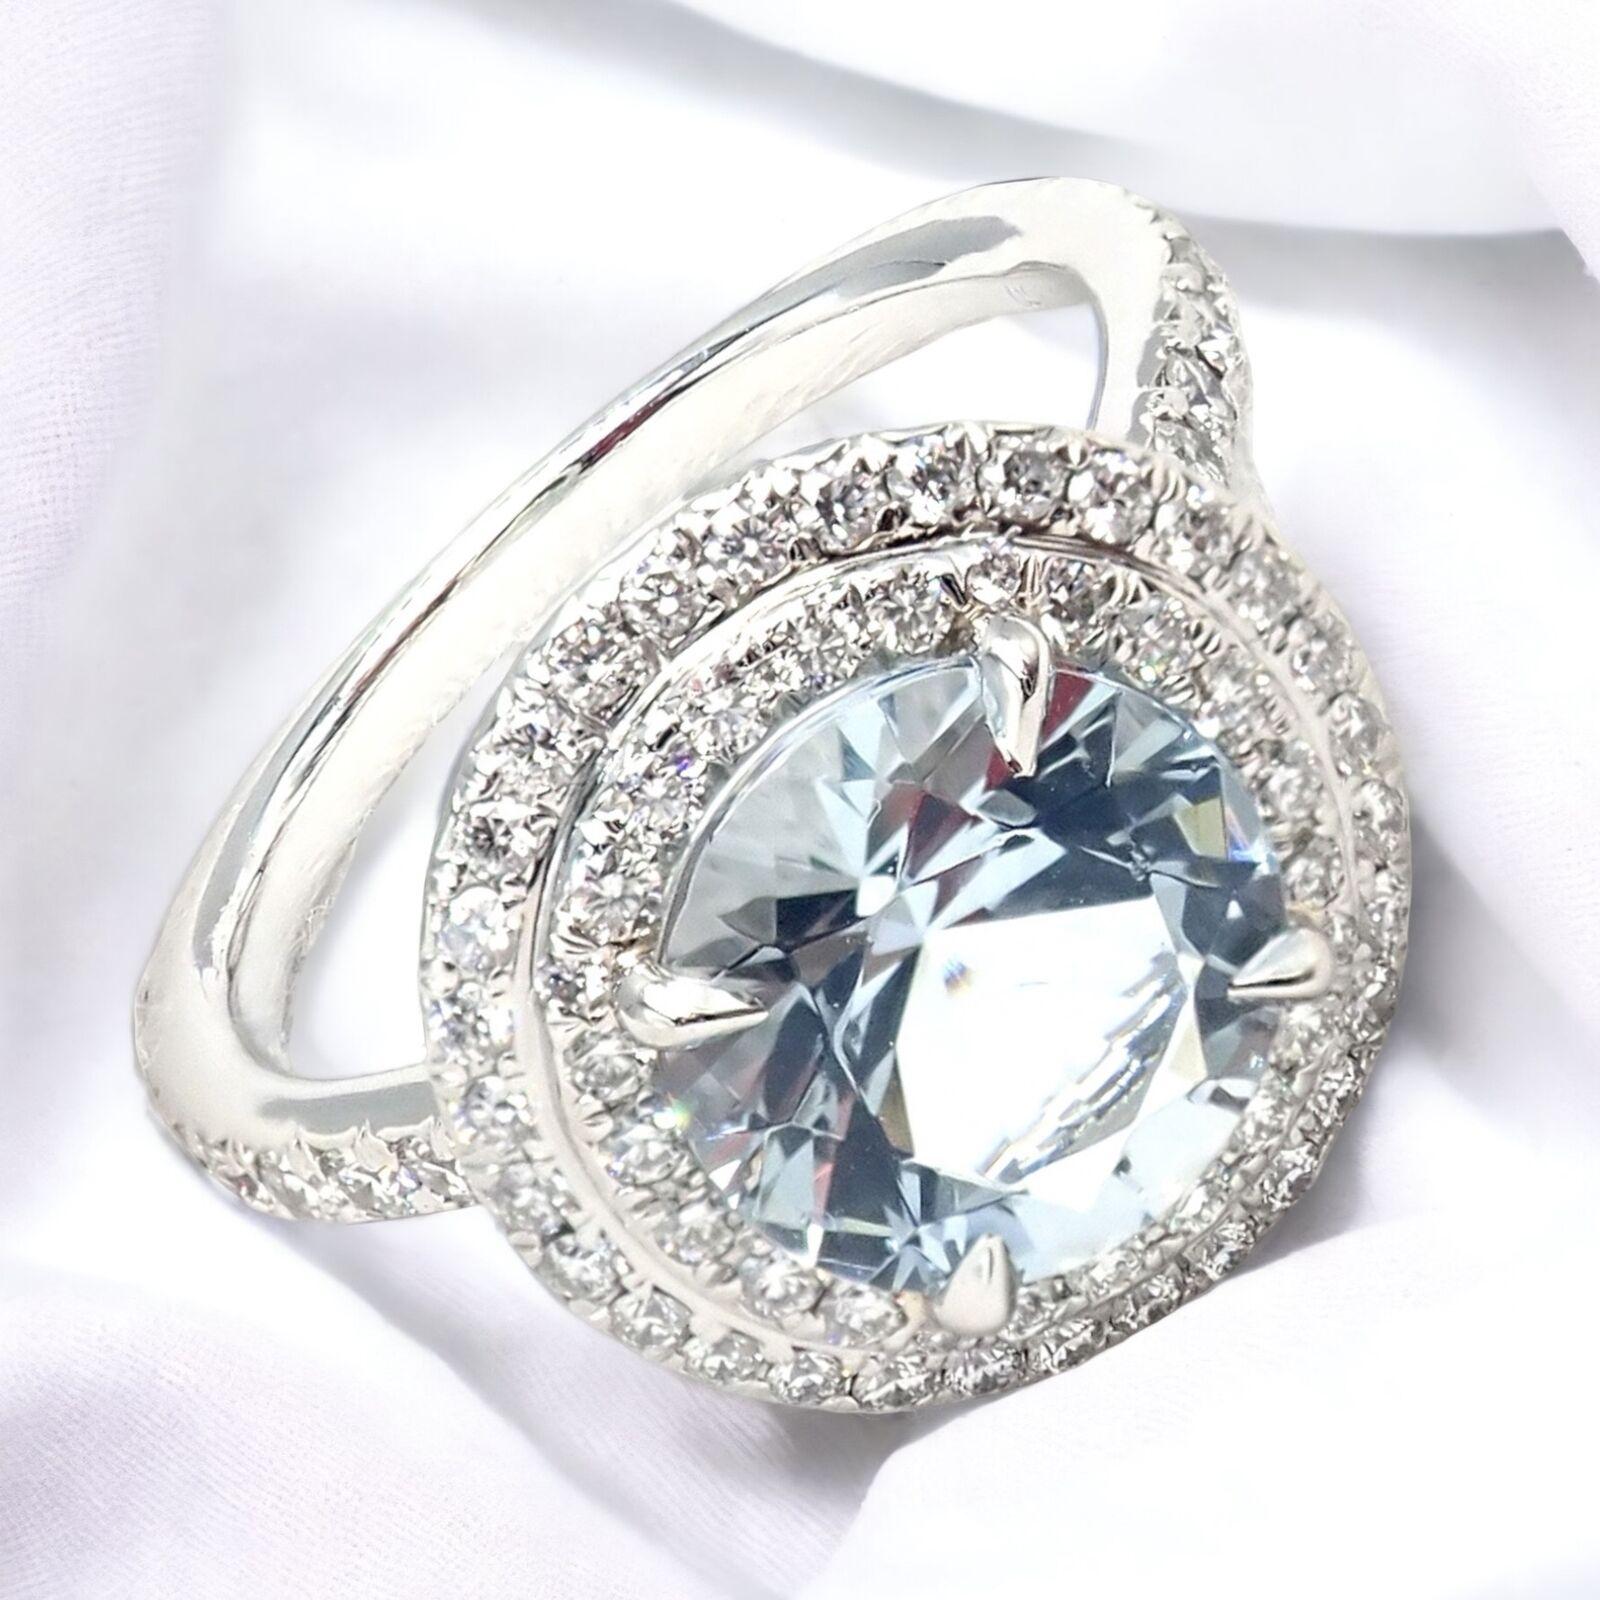 Platinum Diamond Aquamarine Soleste Ring by Tiffany & Co. 
With Aquamarine - 8mm, 0.70ct
Round Brilliant Cut Diamonds VS1 clarity, G color total weight approximately 0.43ctw
This ring comes with Tiffany & Co Box.
The Authentic Tiffany & Co Platinum